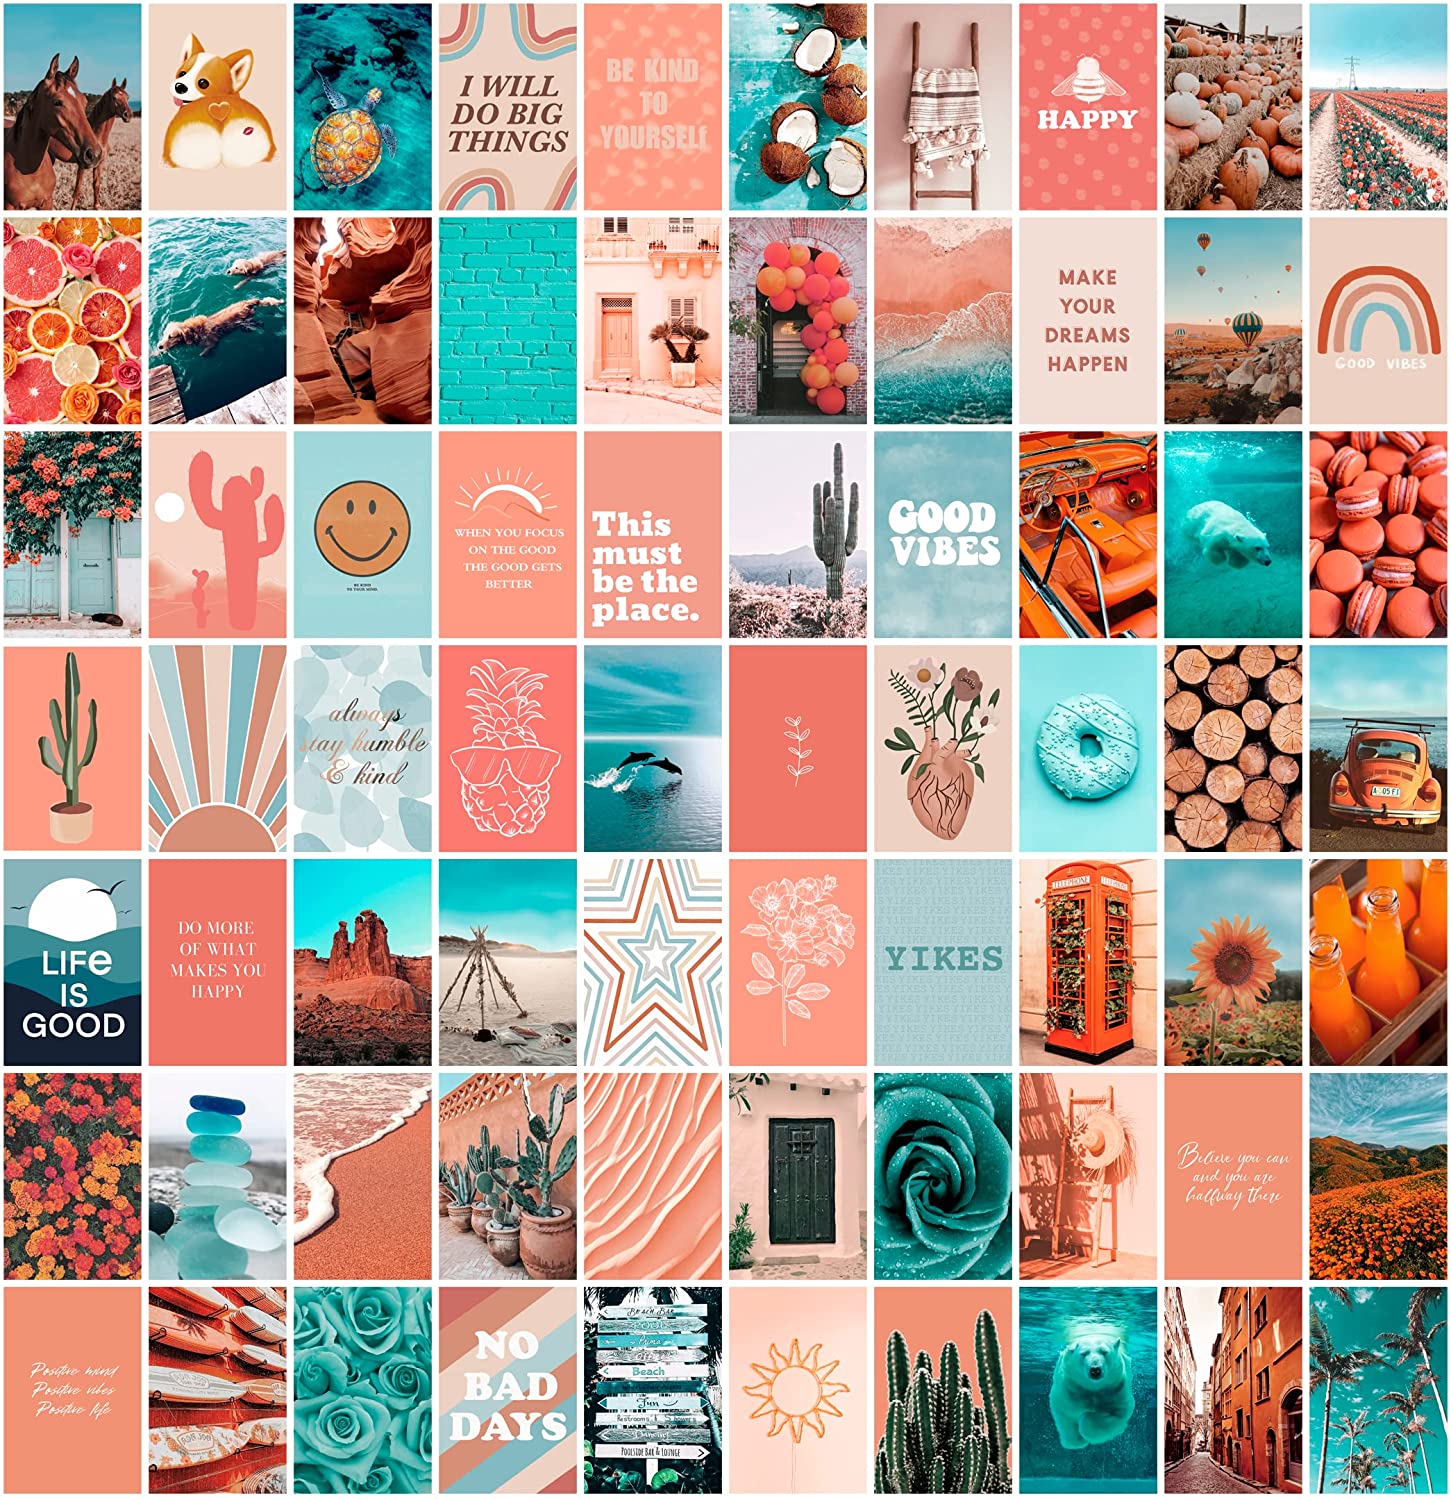 ANERZA Peach Teal Wall Collage Kit Aesthetic Picture, Aesthetic Room Decor for Teen Girls, Cute Dorm Photo Wall Decor, Vsco Trendy Bedroom Posters, Boho Wall Art, Christmas Gifts (70 pcs): Posters